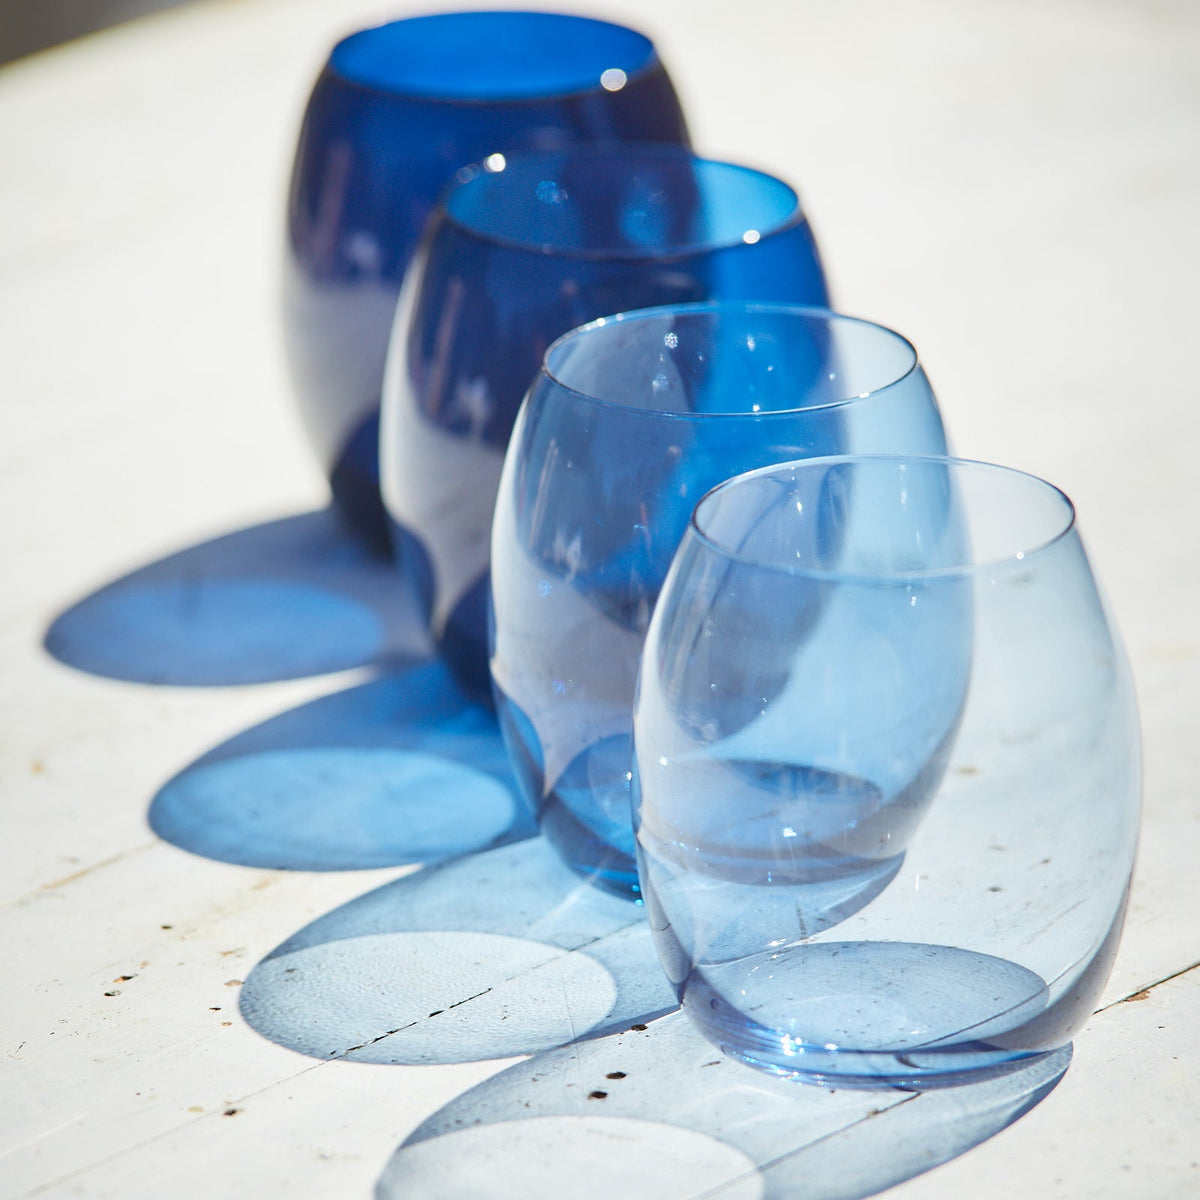 Three Les Nuages Blue Ombré Glasses Set of 4 by Caskata sitting on a table.